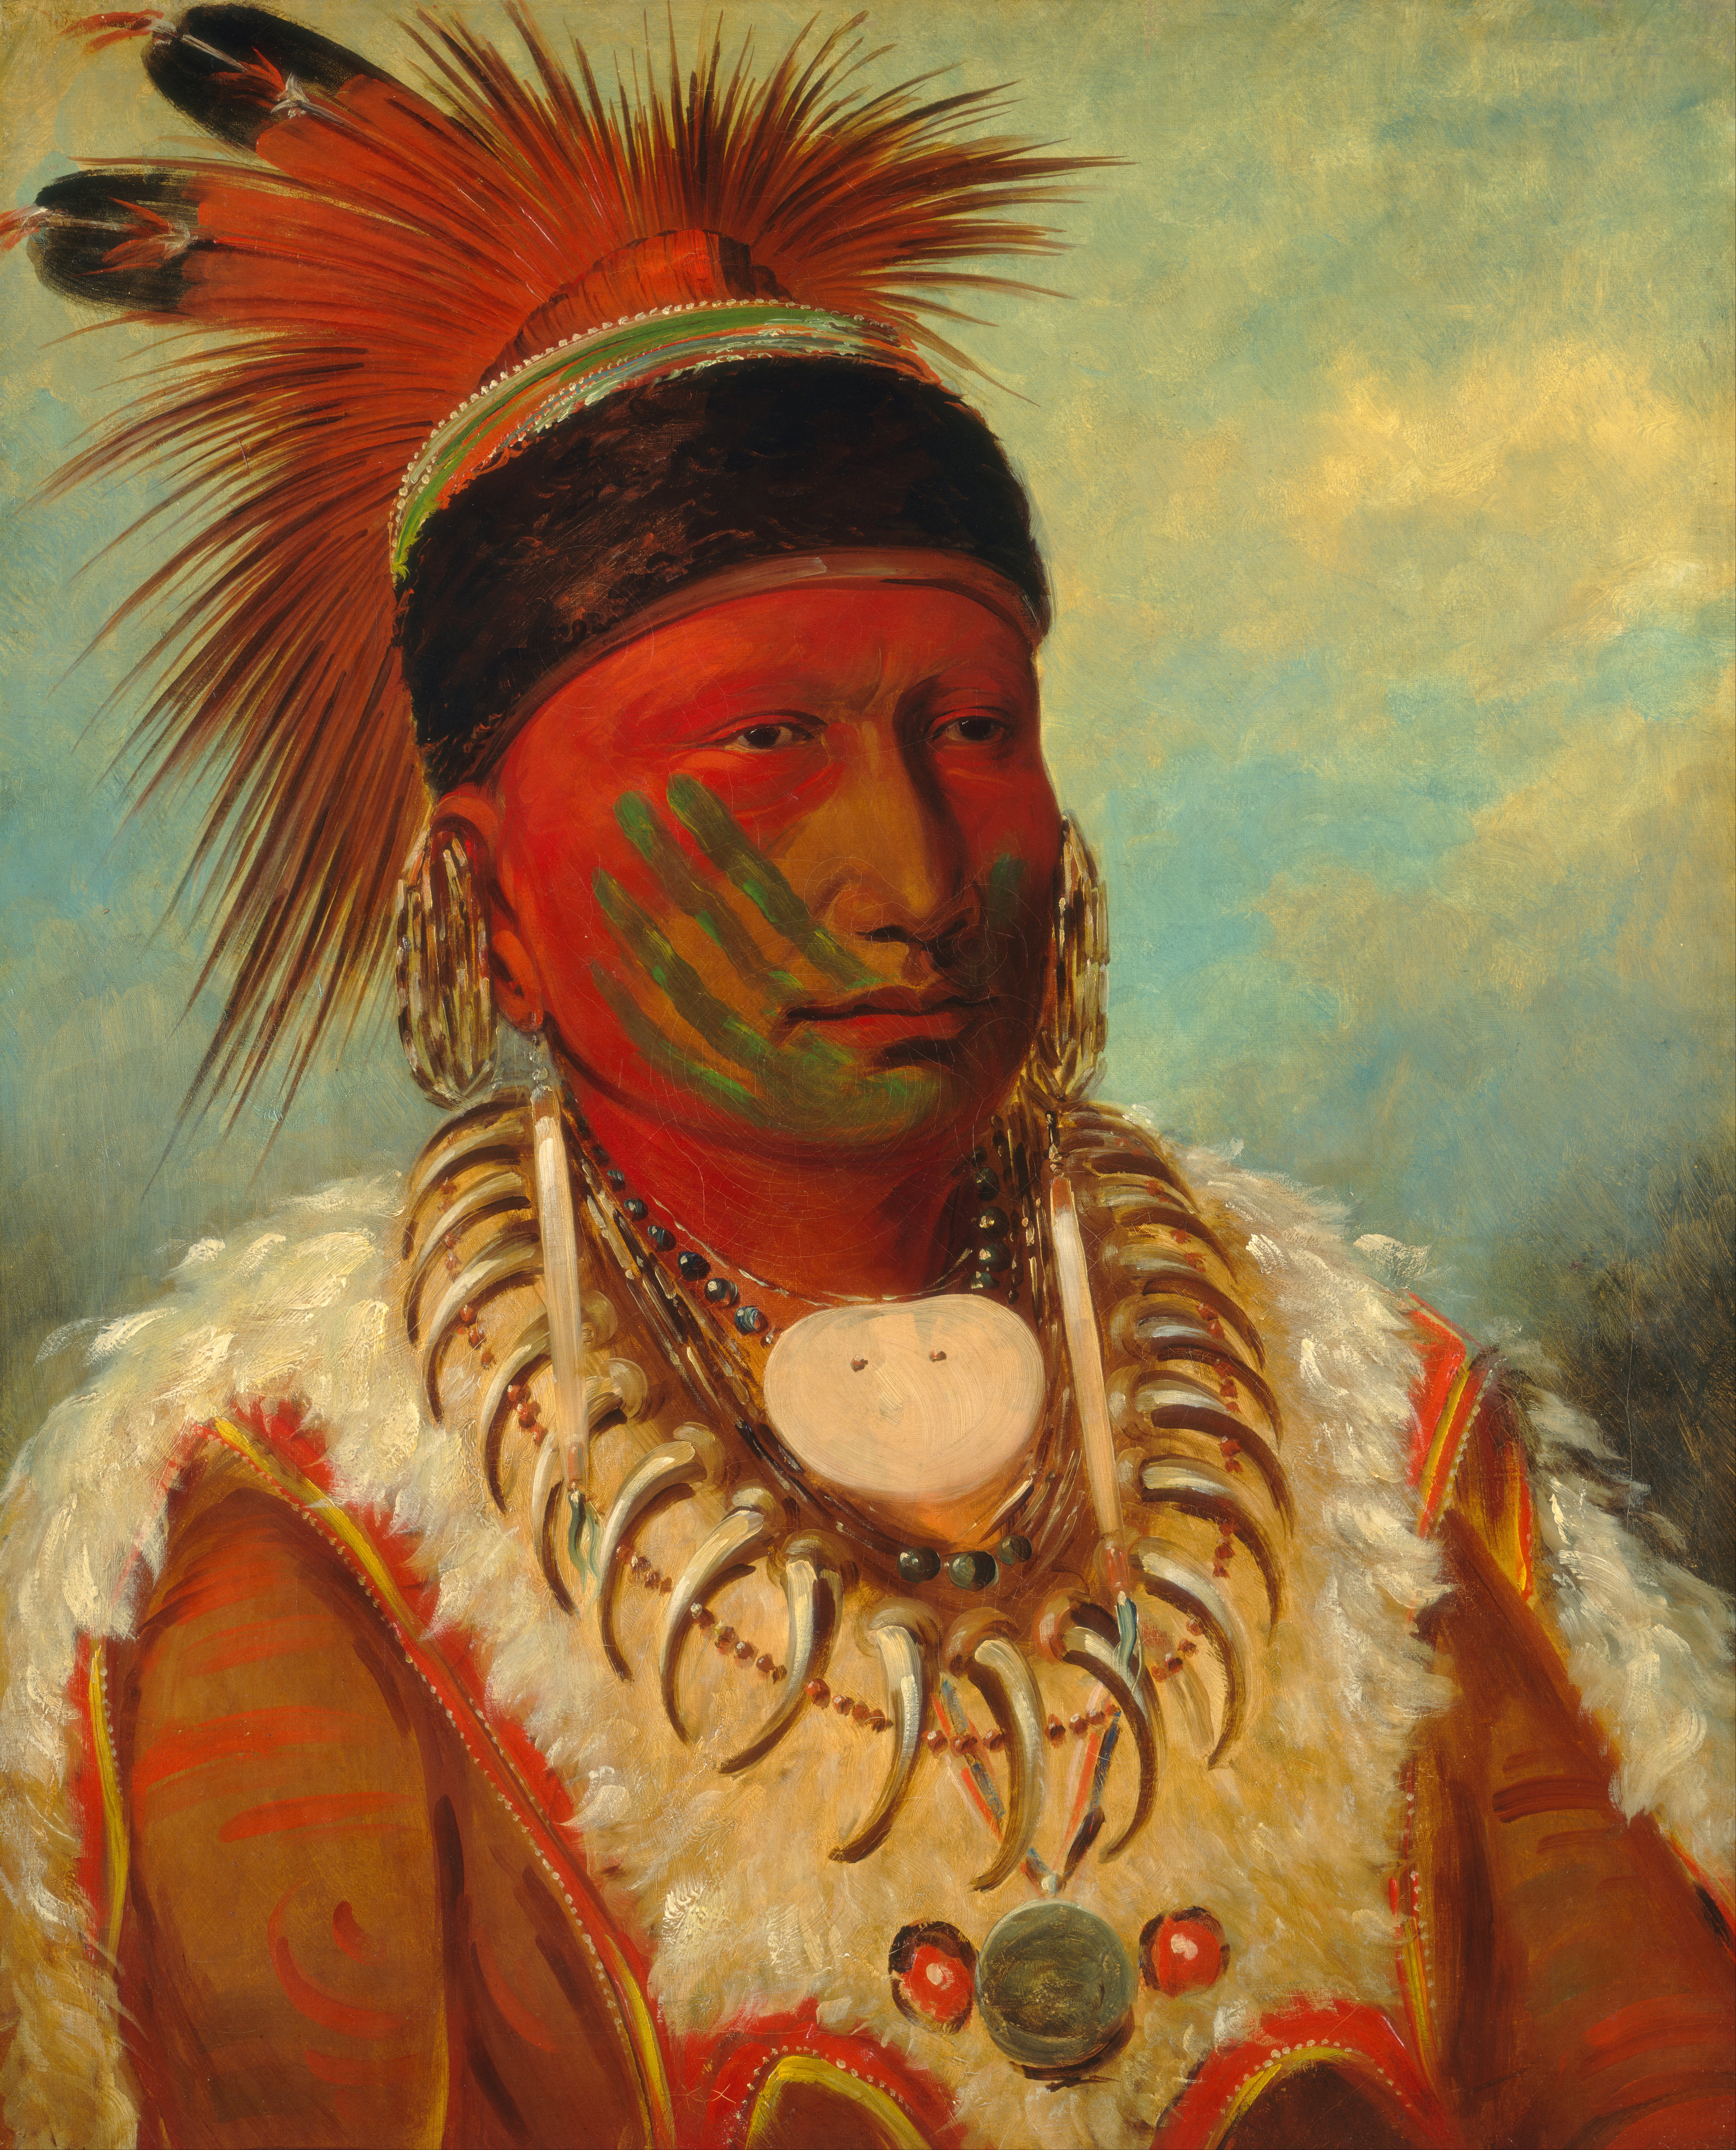 A portrait painting by American artist George Catlin. Native American Male in ceremonial garb. Tunic of white fur. Necklace of animal’s claws strung on a cord. Oblong medallion displayed at throat. Headdress of a headband decorated with feathers. Face paint on right cheek of four slashing parallel lines of green color.